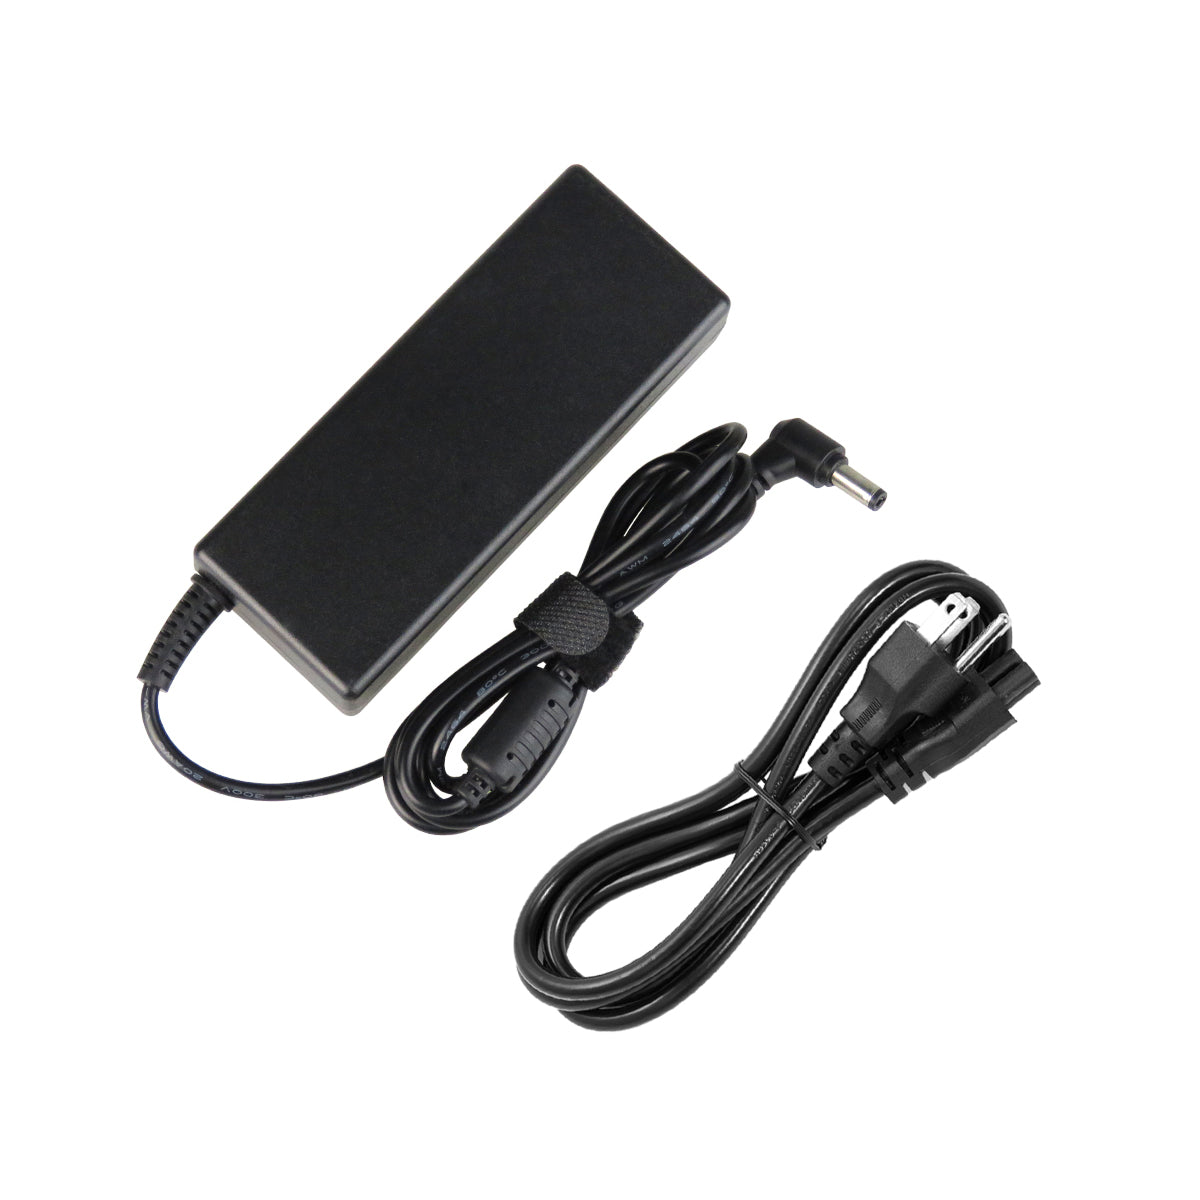 AC Adapter Charger for ASUS A84SJ Notebook.